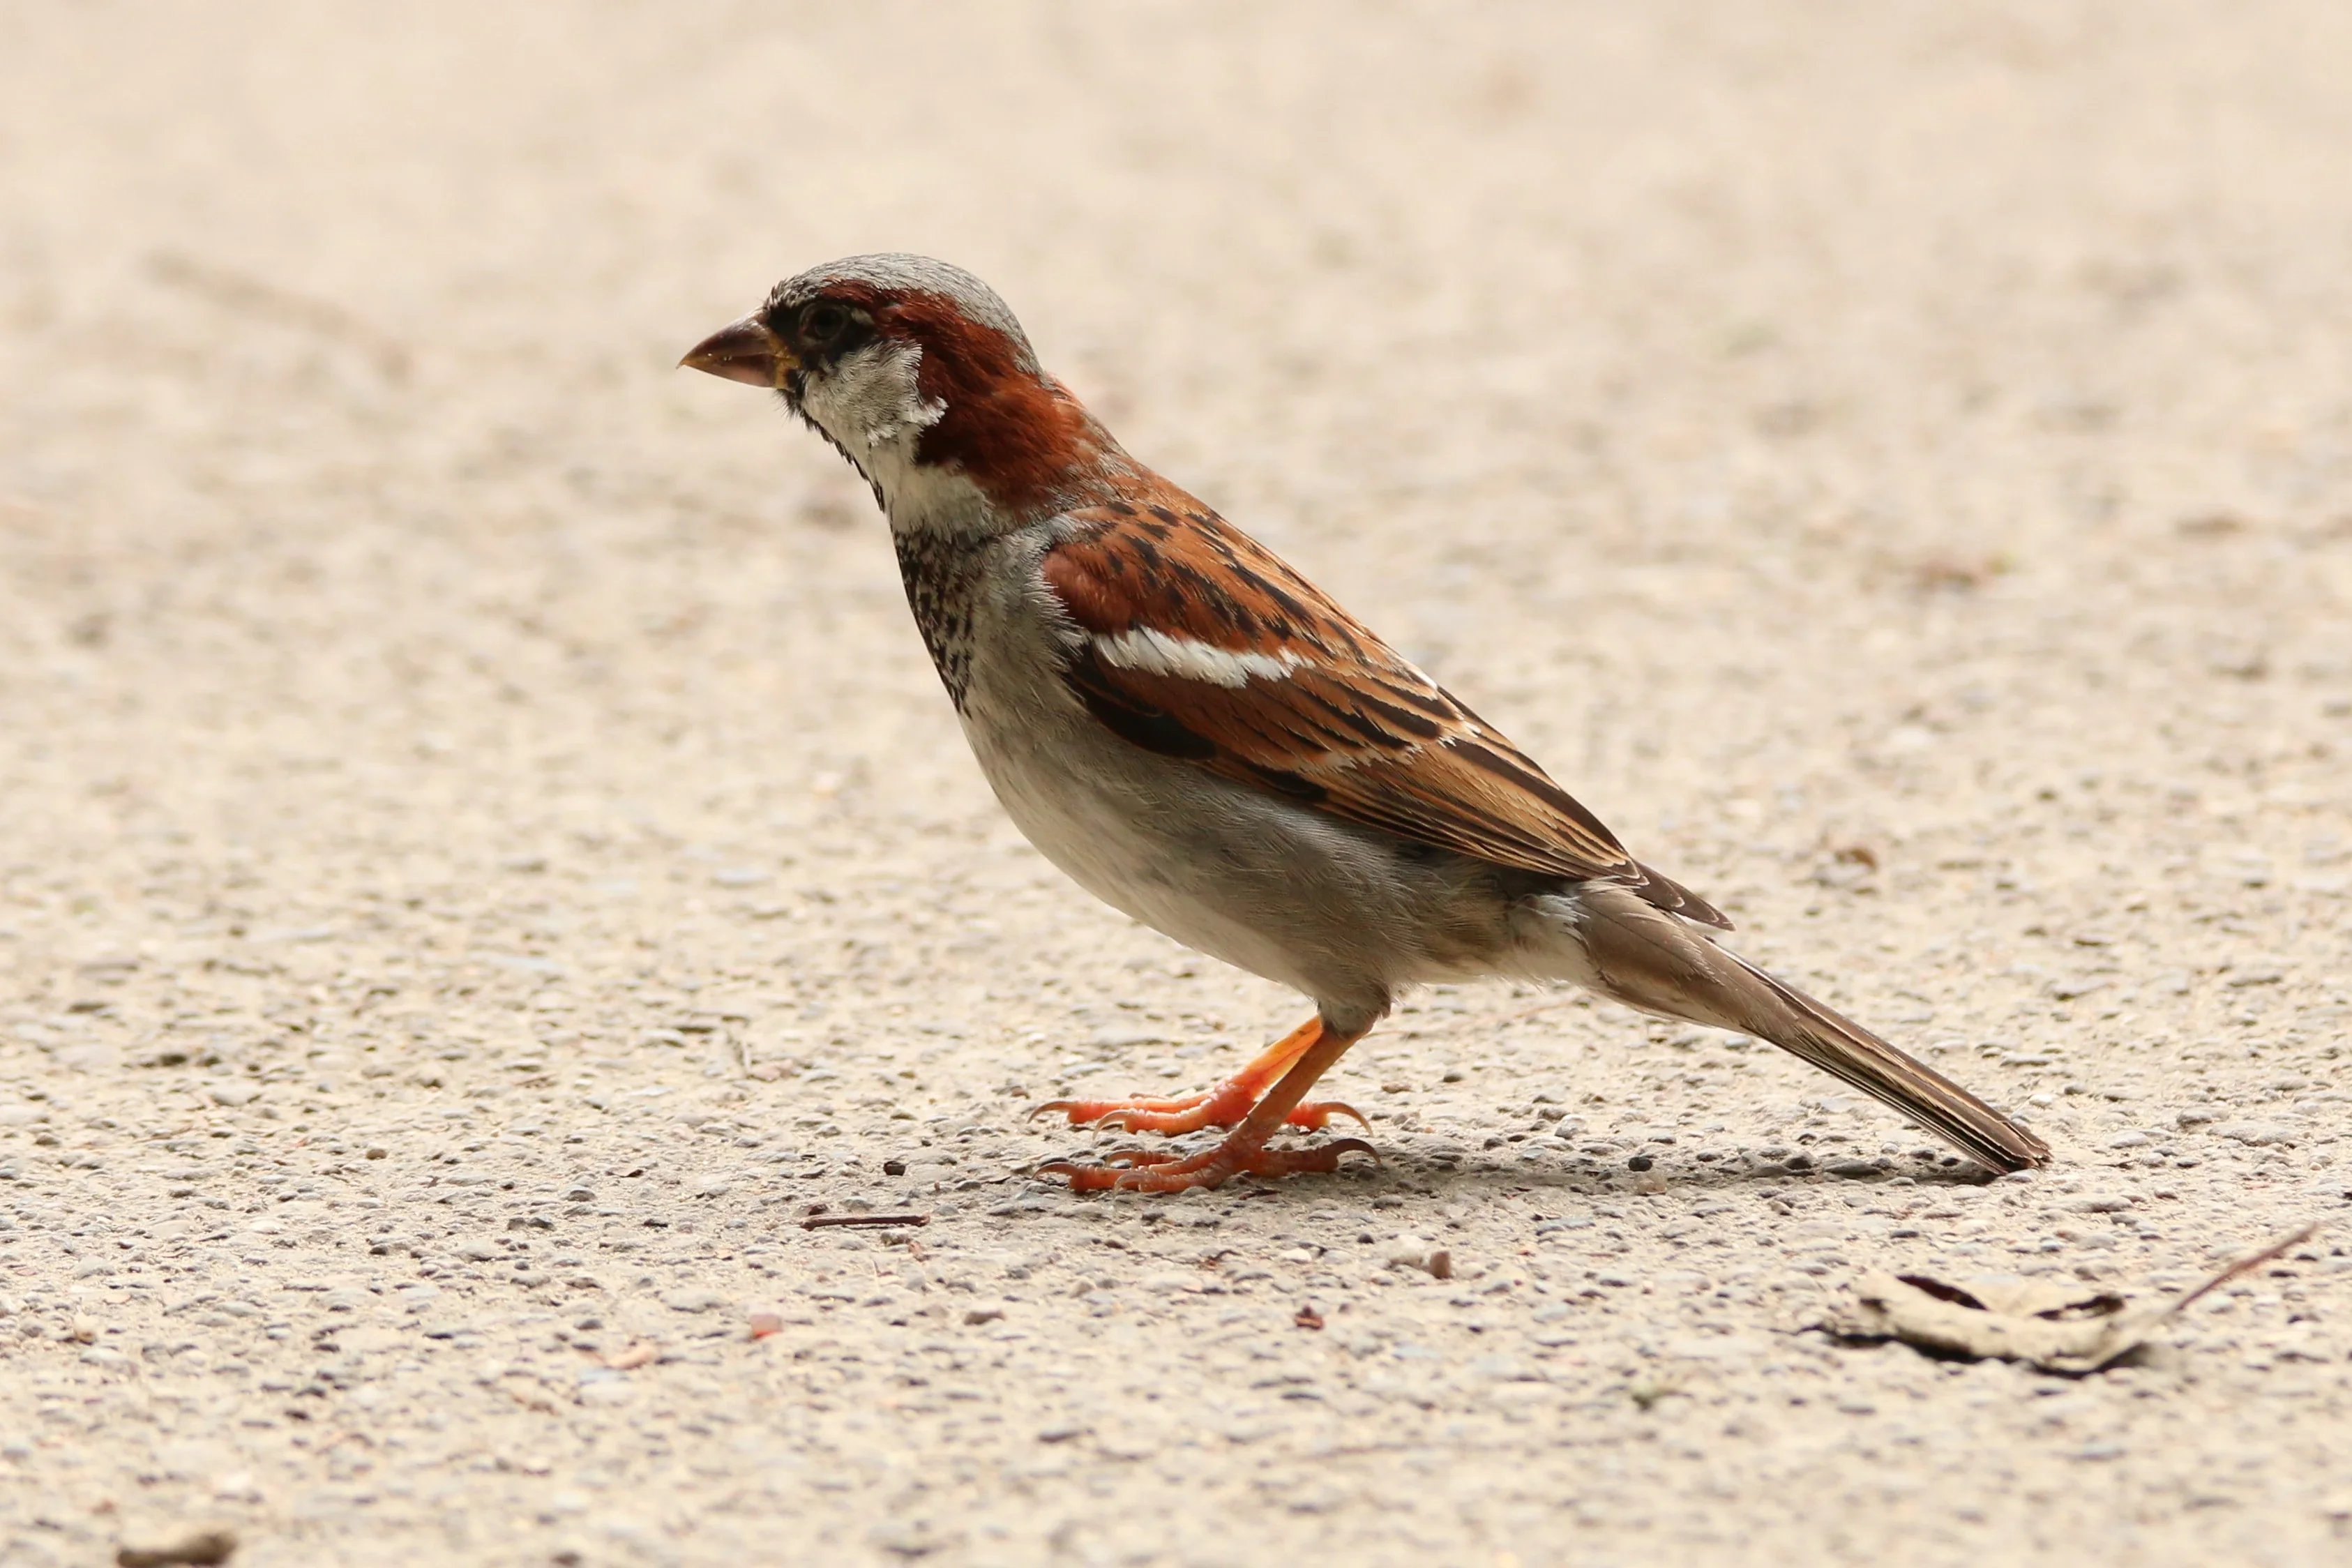 A sparrow sitting on a concrete path. This one has a rather colorful brown feather cover and very orange feet.